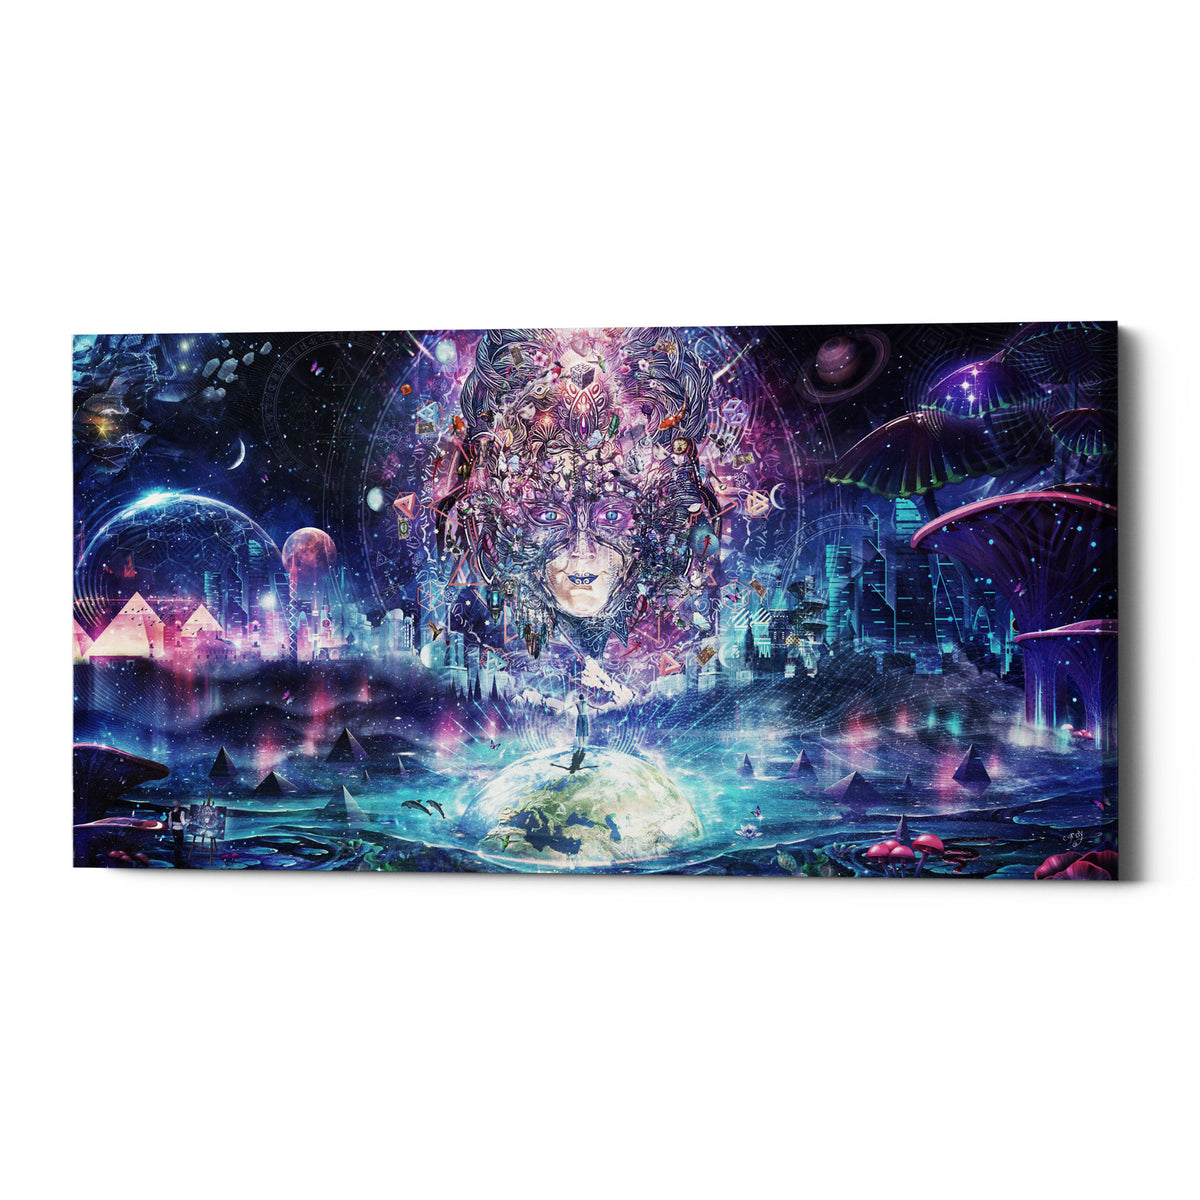 Epic Graffiti &quot;Quest for the Peak Experience&quot; by Cameron Gray, Giclee Canvas Wall Art